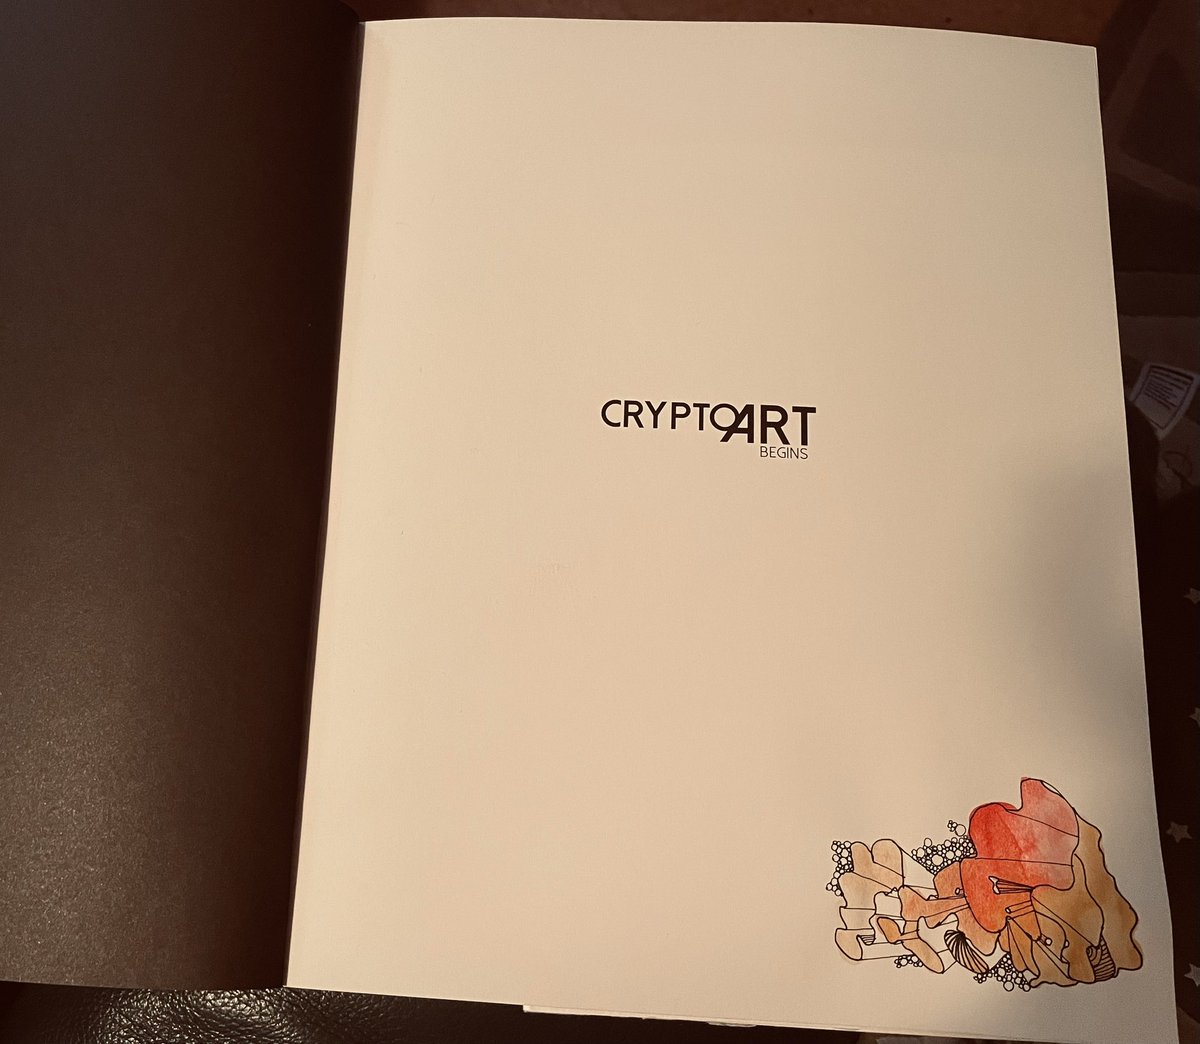 Signing a CryptoArt Begins book for my biggest fan #WIP

@eleonorabrizi @ACVAULT @TheNFTMag @Rizzoli_Books #cryptoartbegins